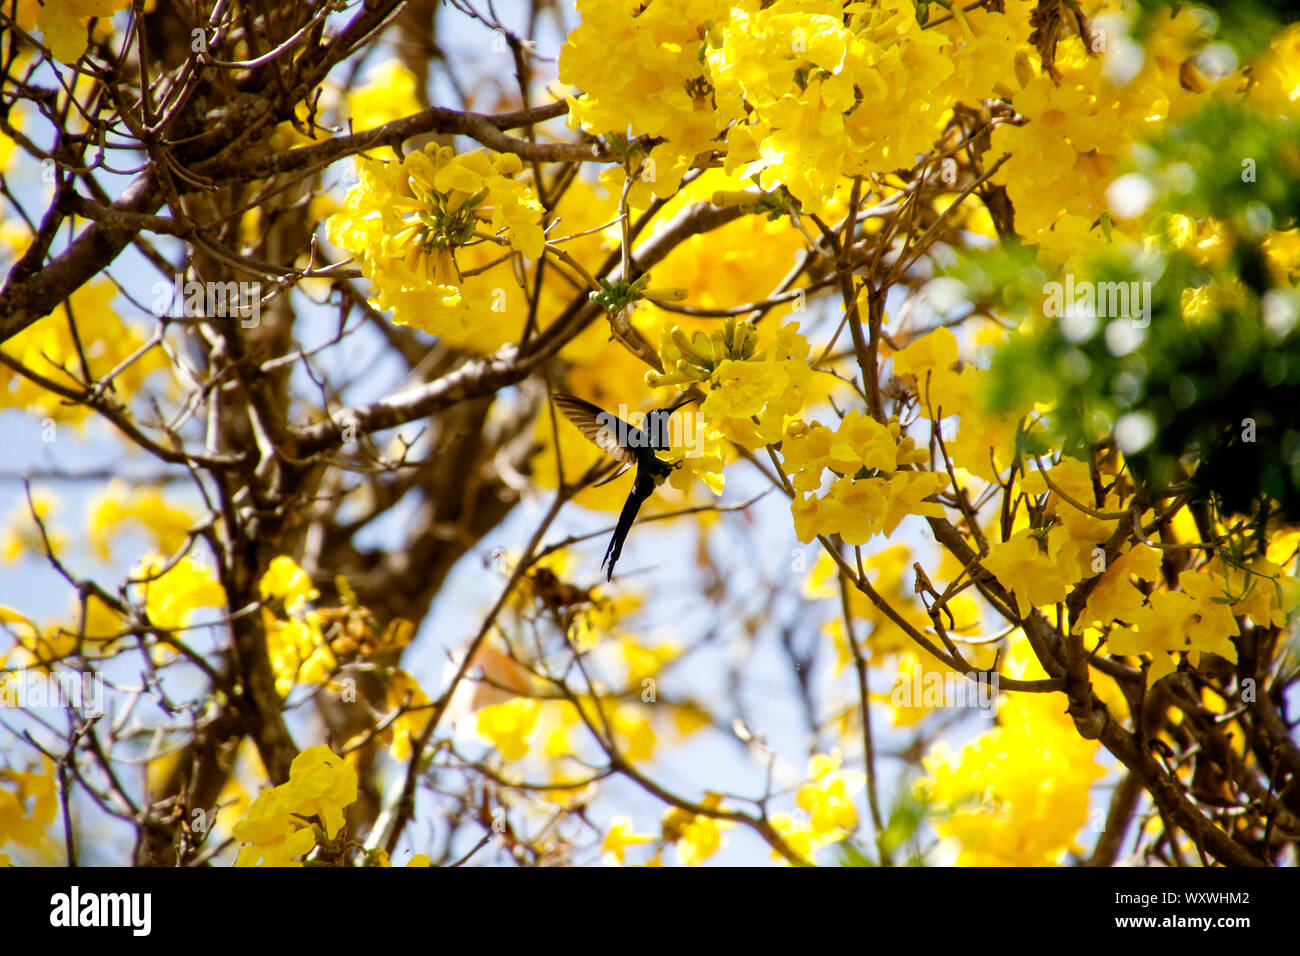 Hummingbird bird flying in flower detail on yellow ipe tree with bright blue sky Stock Photo